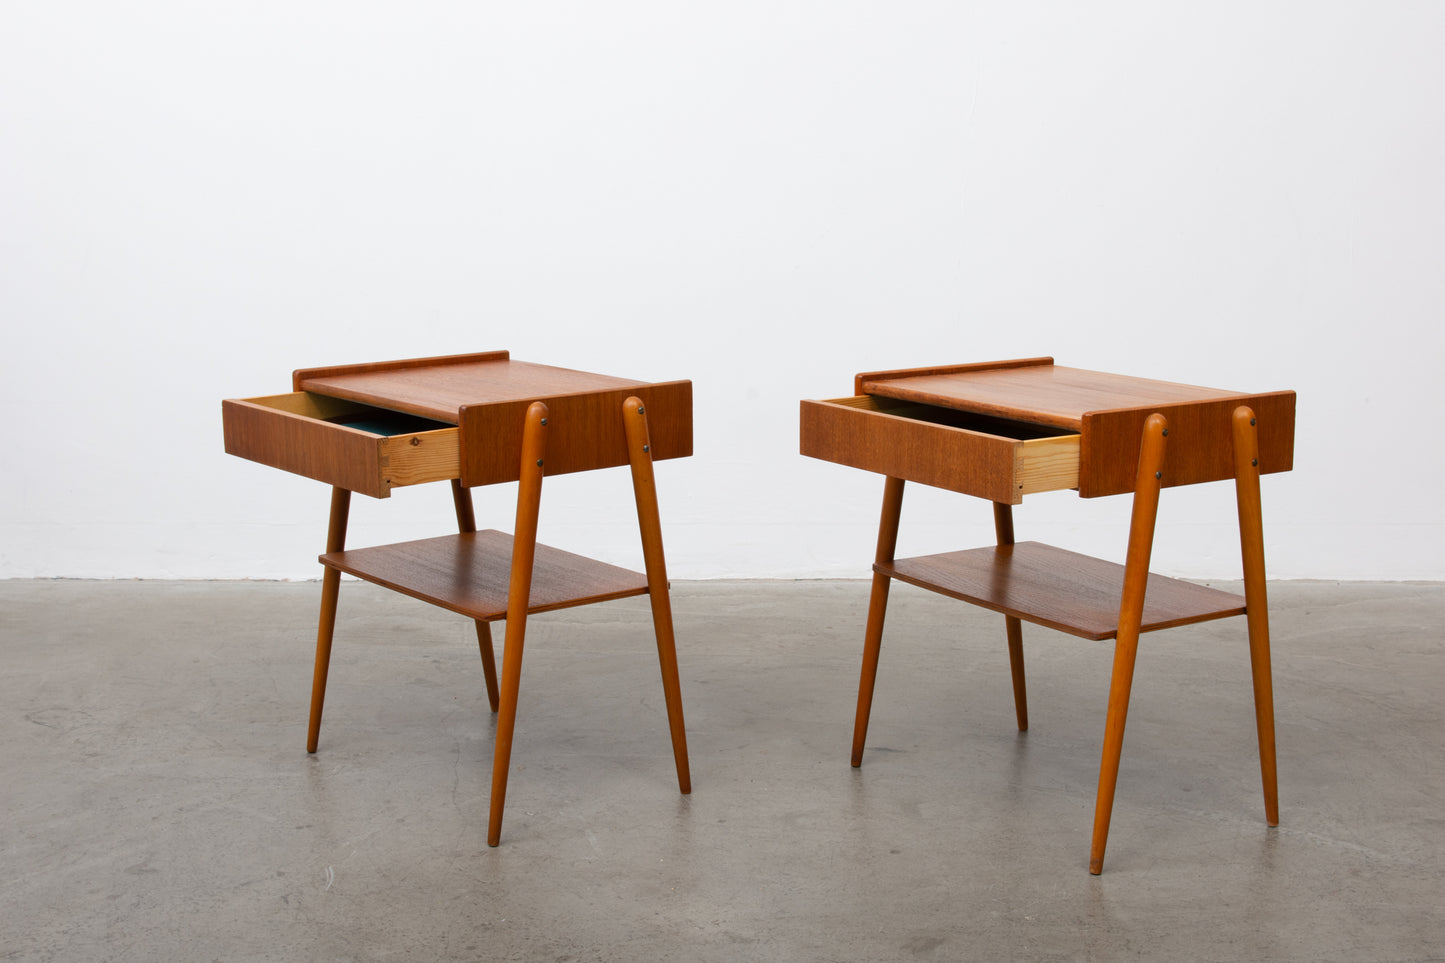 Pair of teak bedside tables by AB Carlström & Co.